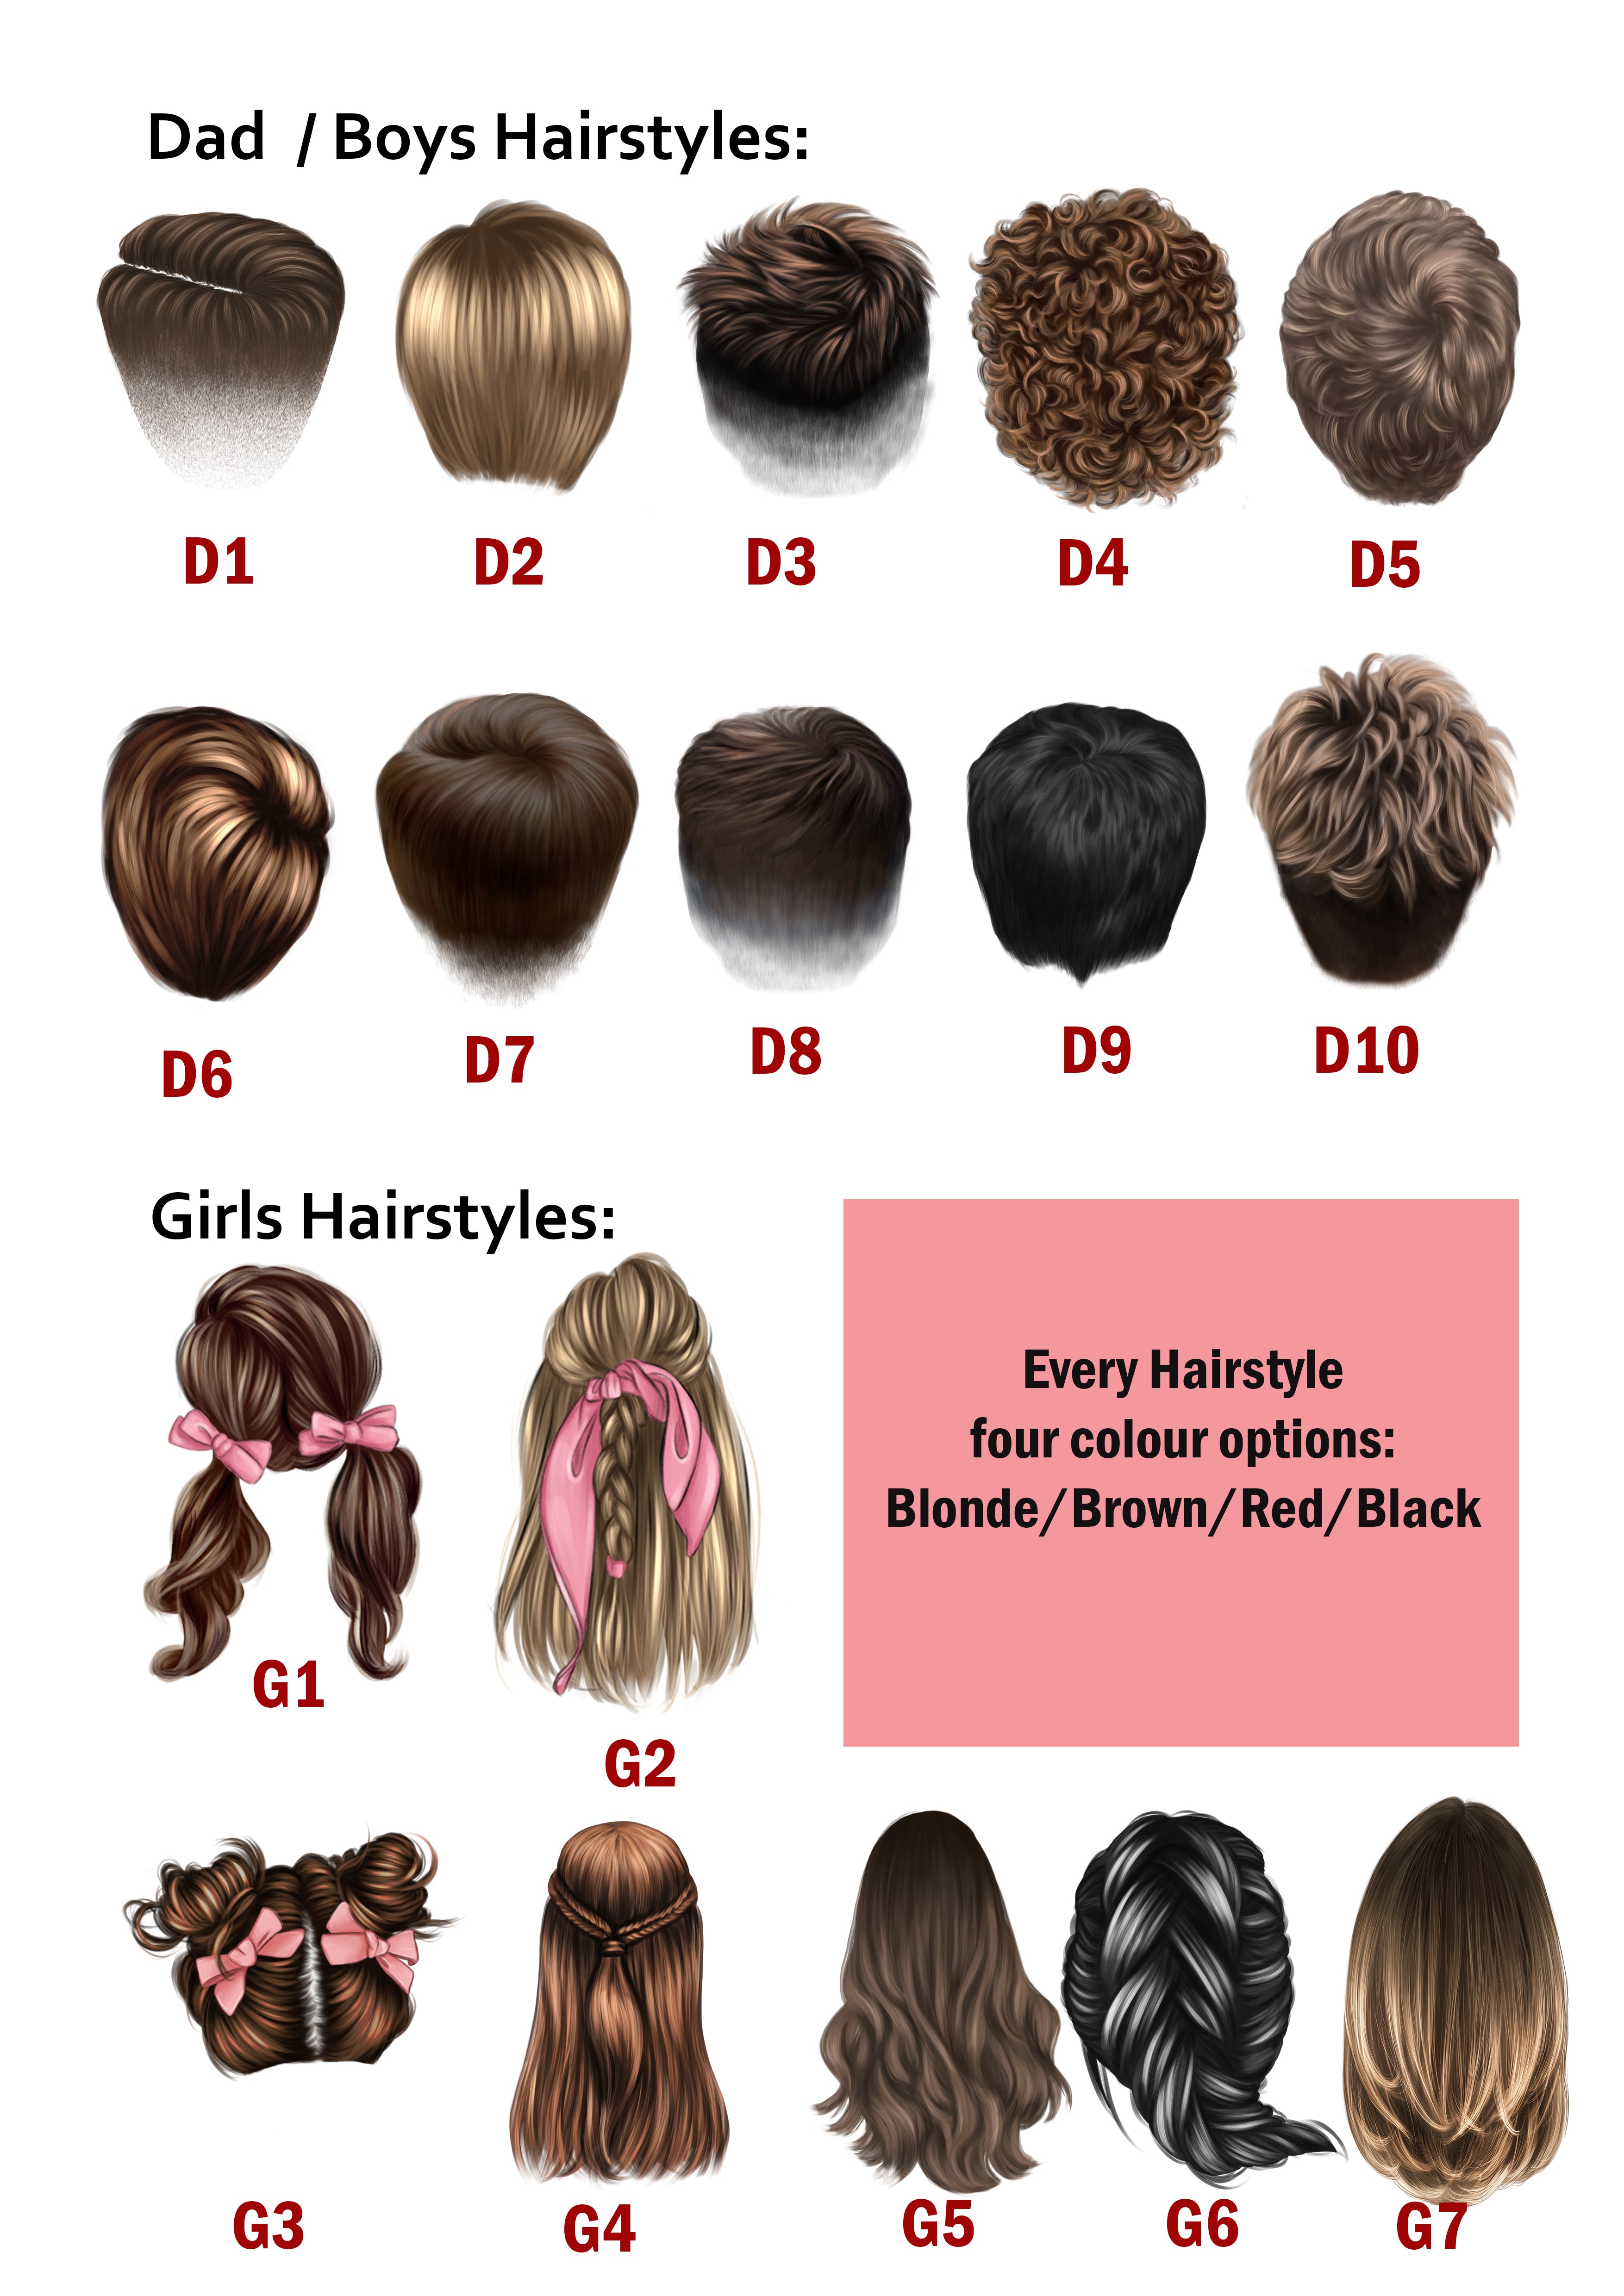 Girls Hairstyles that Dads Can Do - Pigtails & Crewcuts